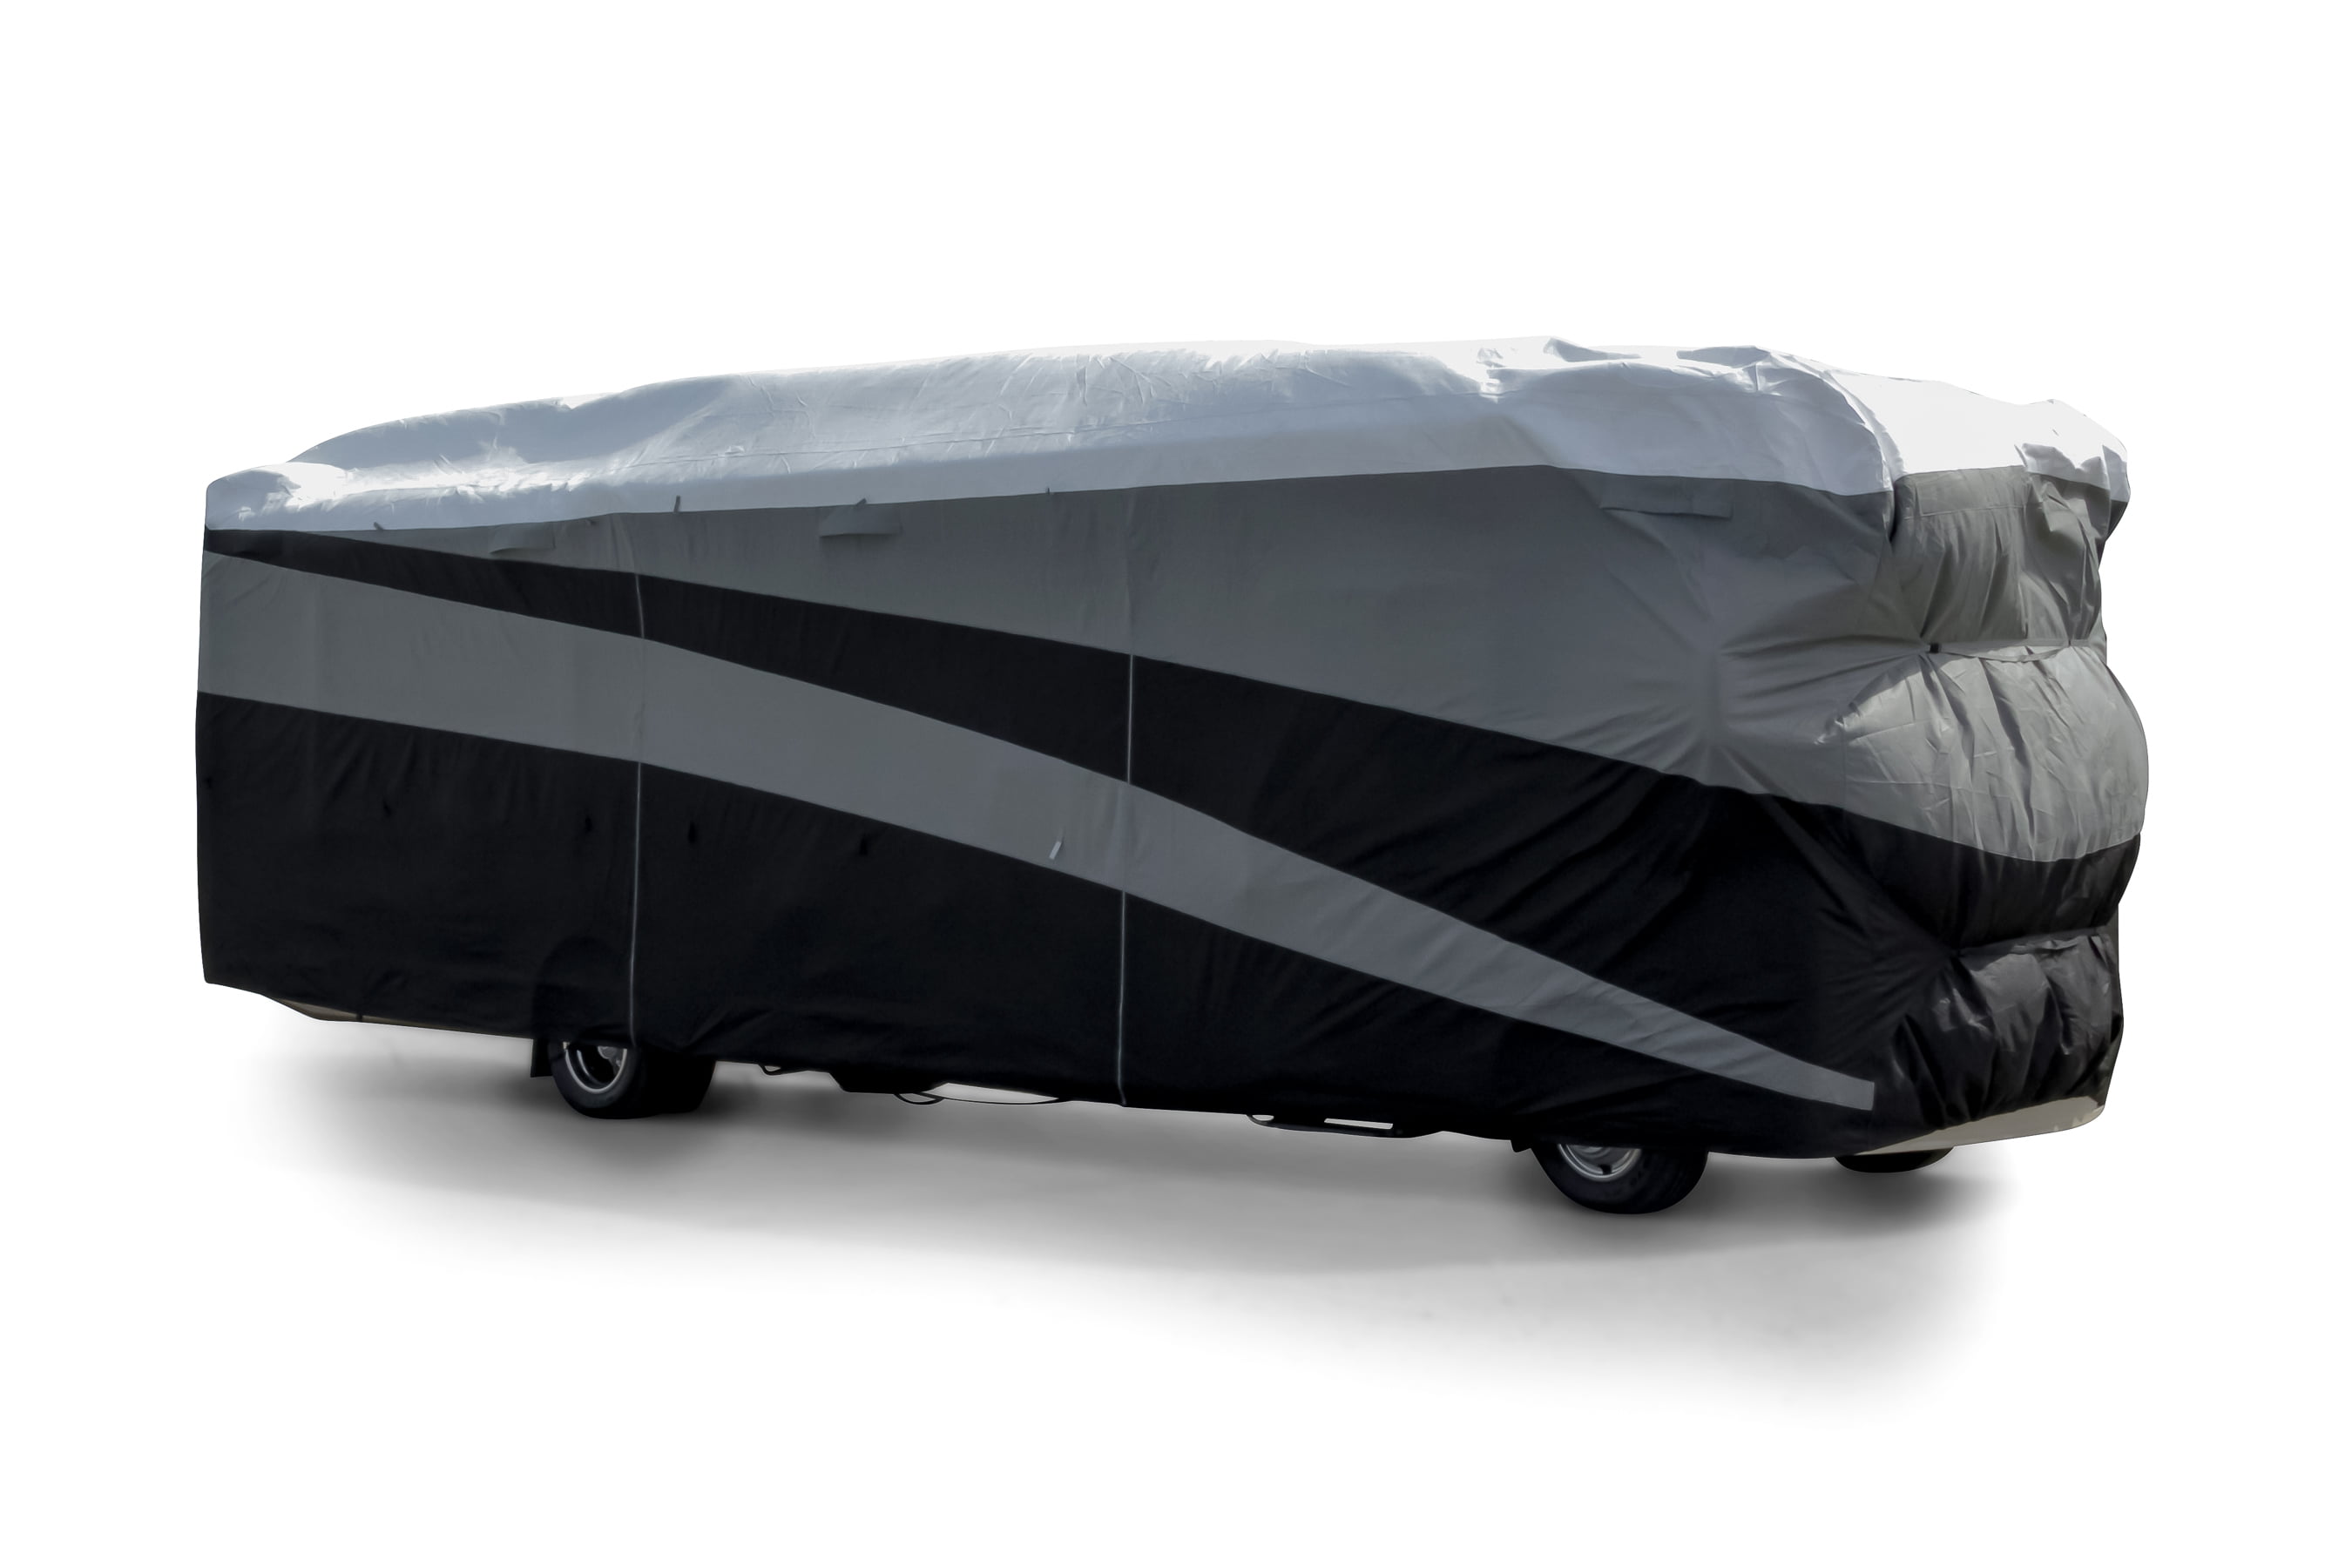 Weatherproof with UV Protection and Dupont Tyvek Top 56104 Camco 31-34 ULTRAGuard Supreme Cover-Extremely Durable Design Fits Class A Model RVs 